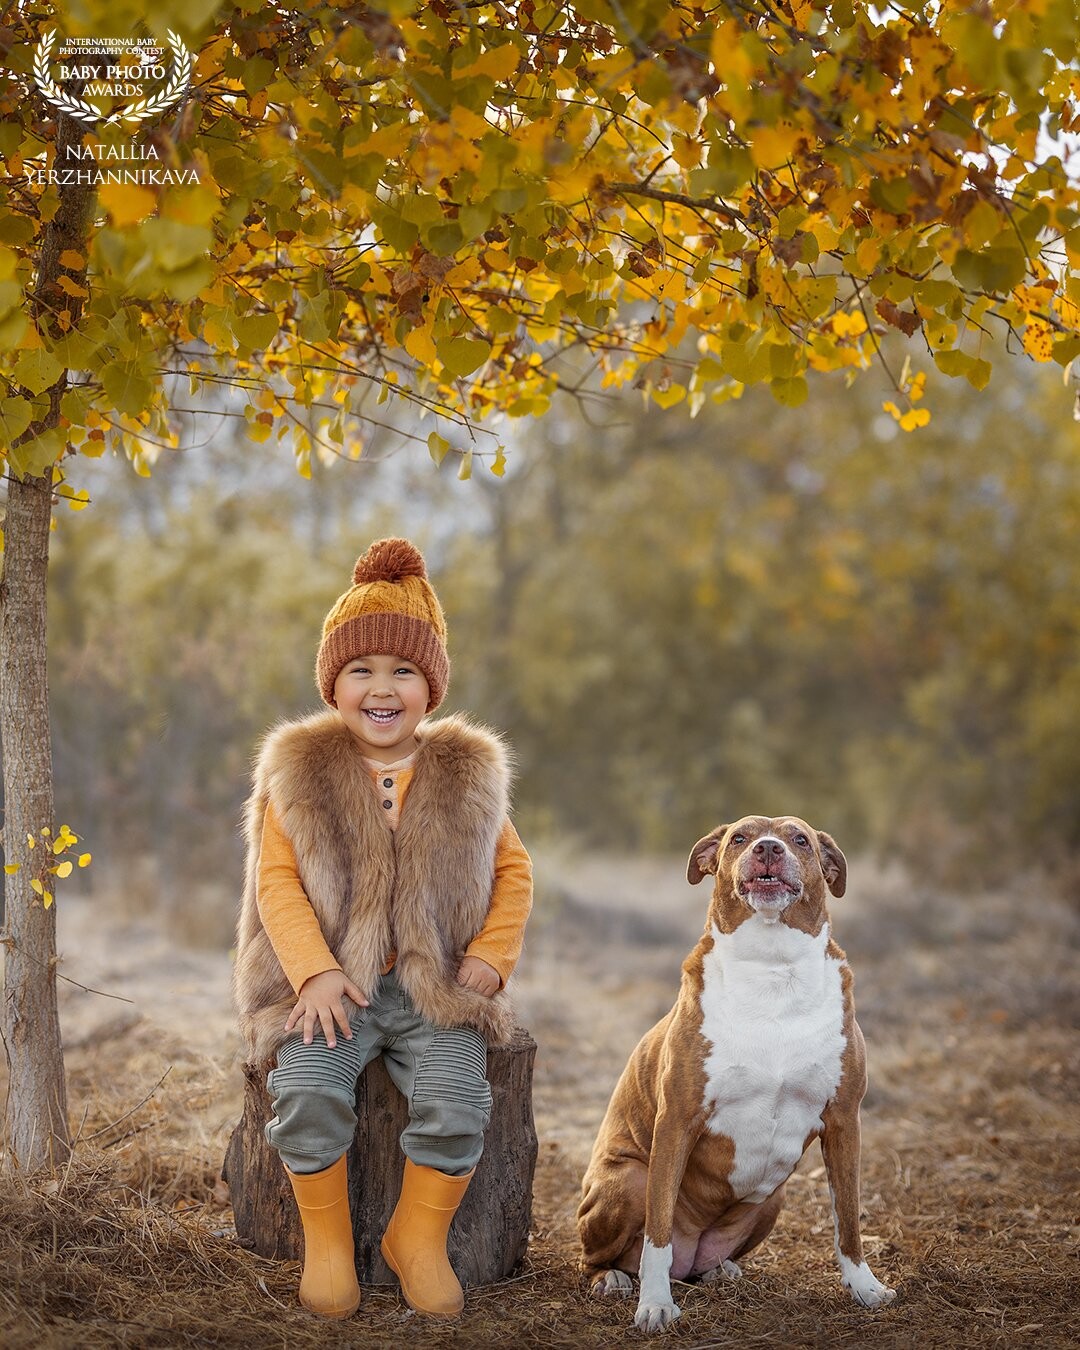 The Boy and his best friend up for next adventure. After moving from Arizona where they had no Autumn, the leave changing color experience really excited them both. <br />
New colors, new smells new everything...